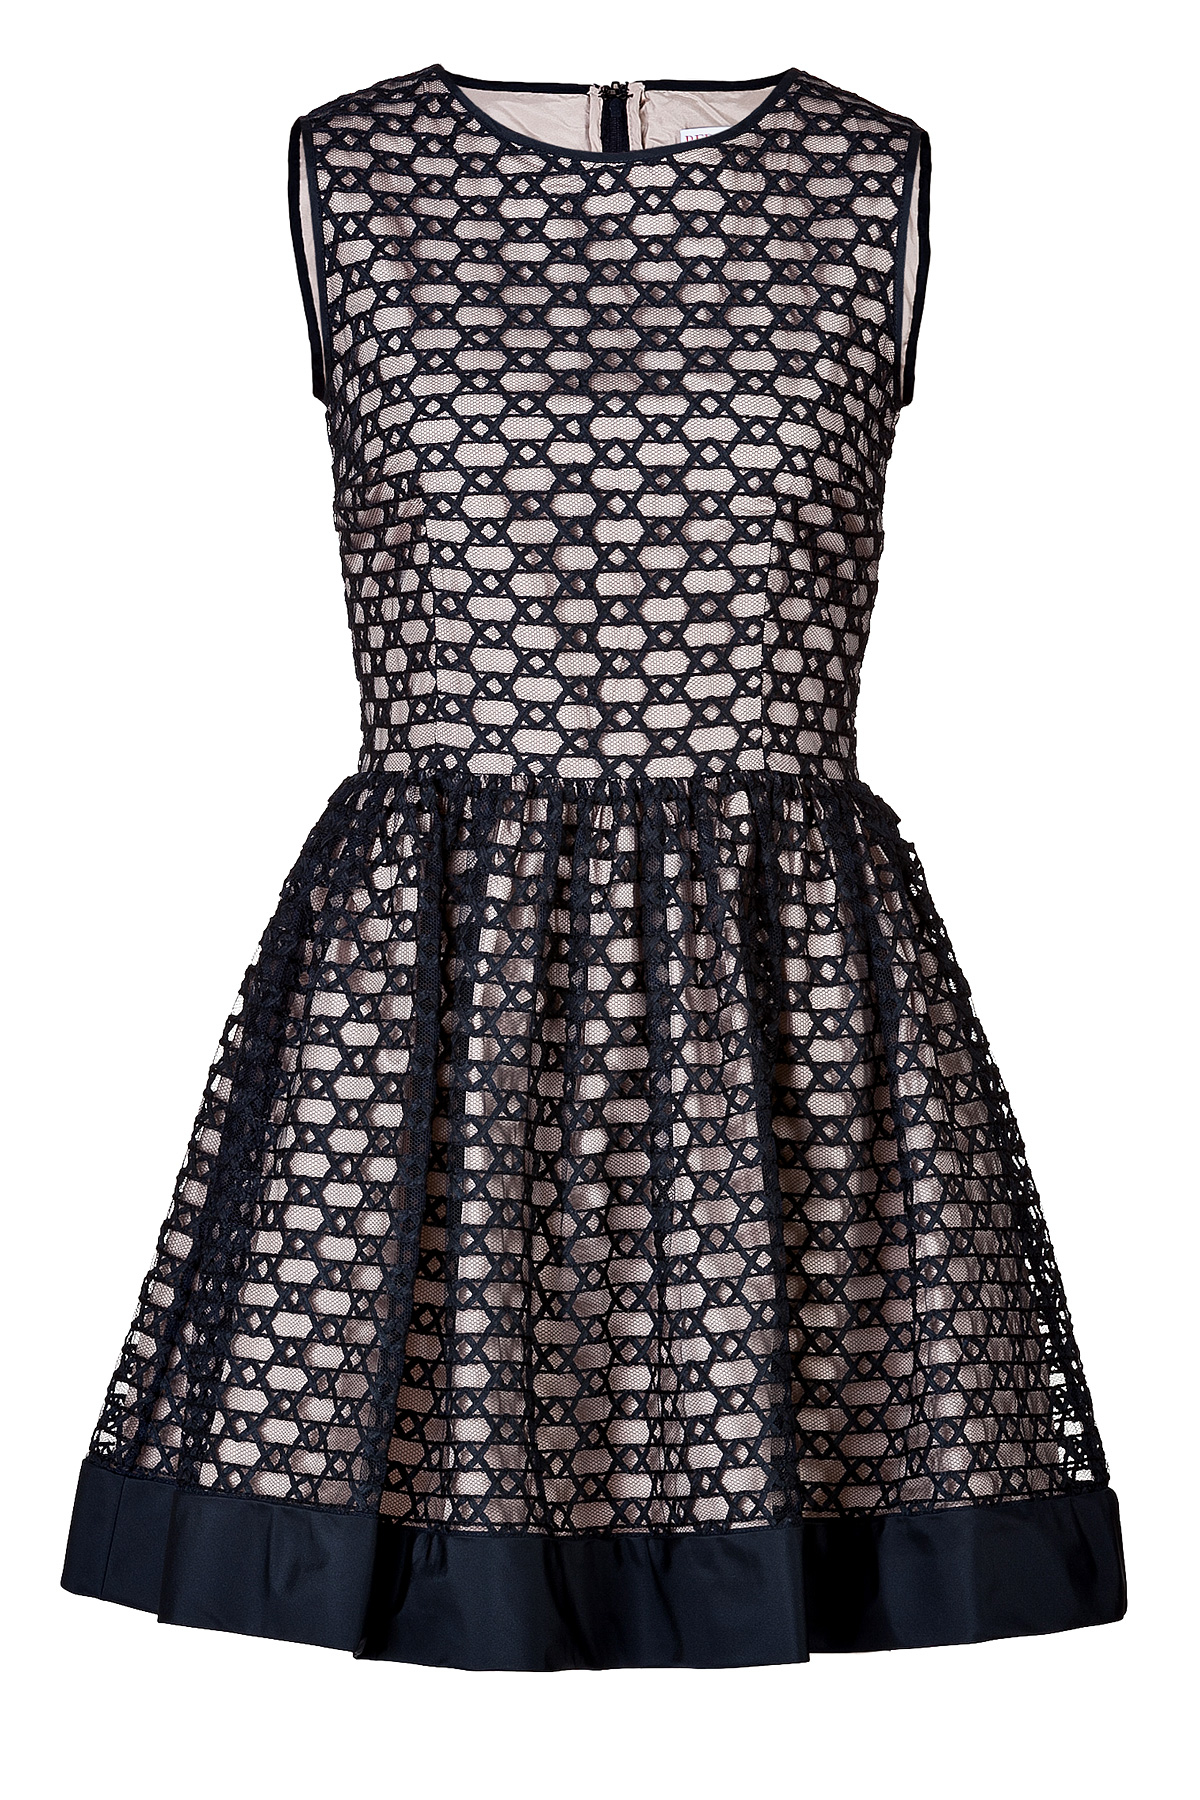 Lyst - Red Valentino Fit And Flare Dress in Blue